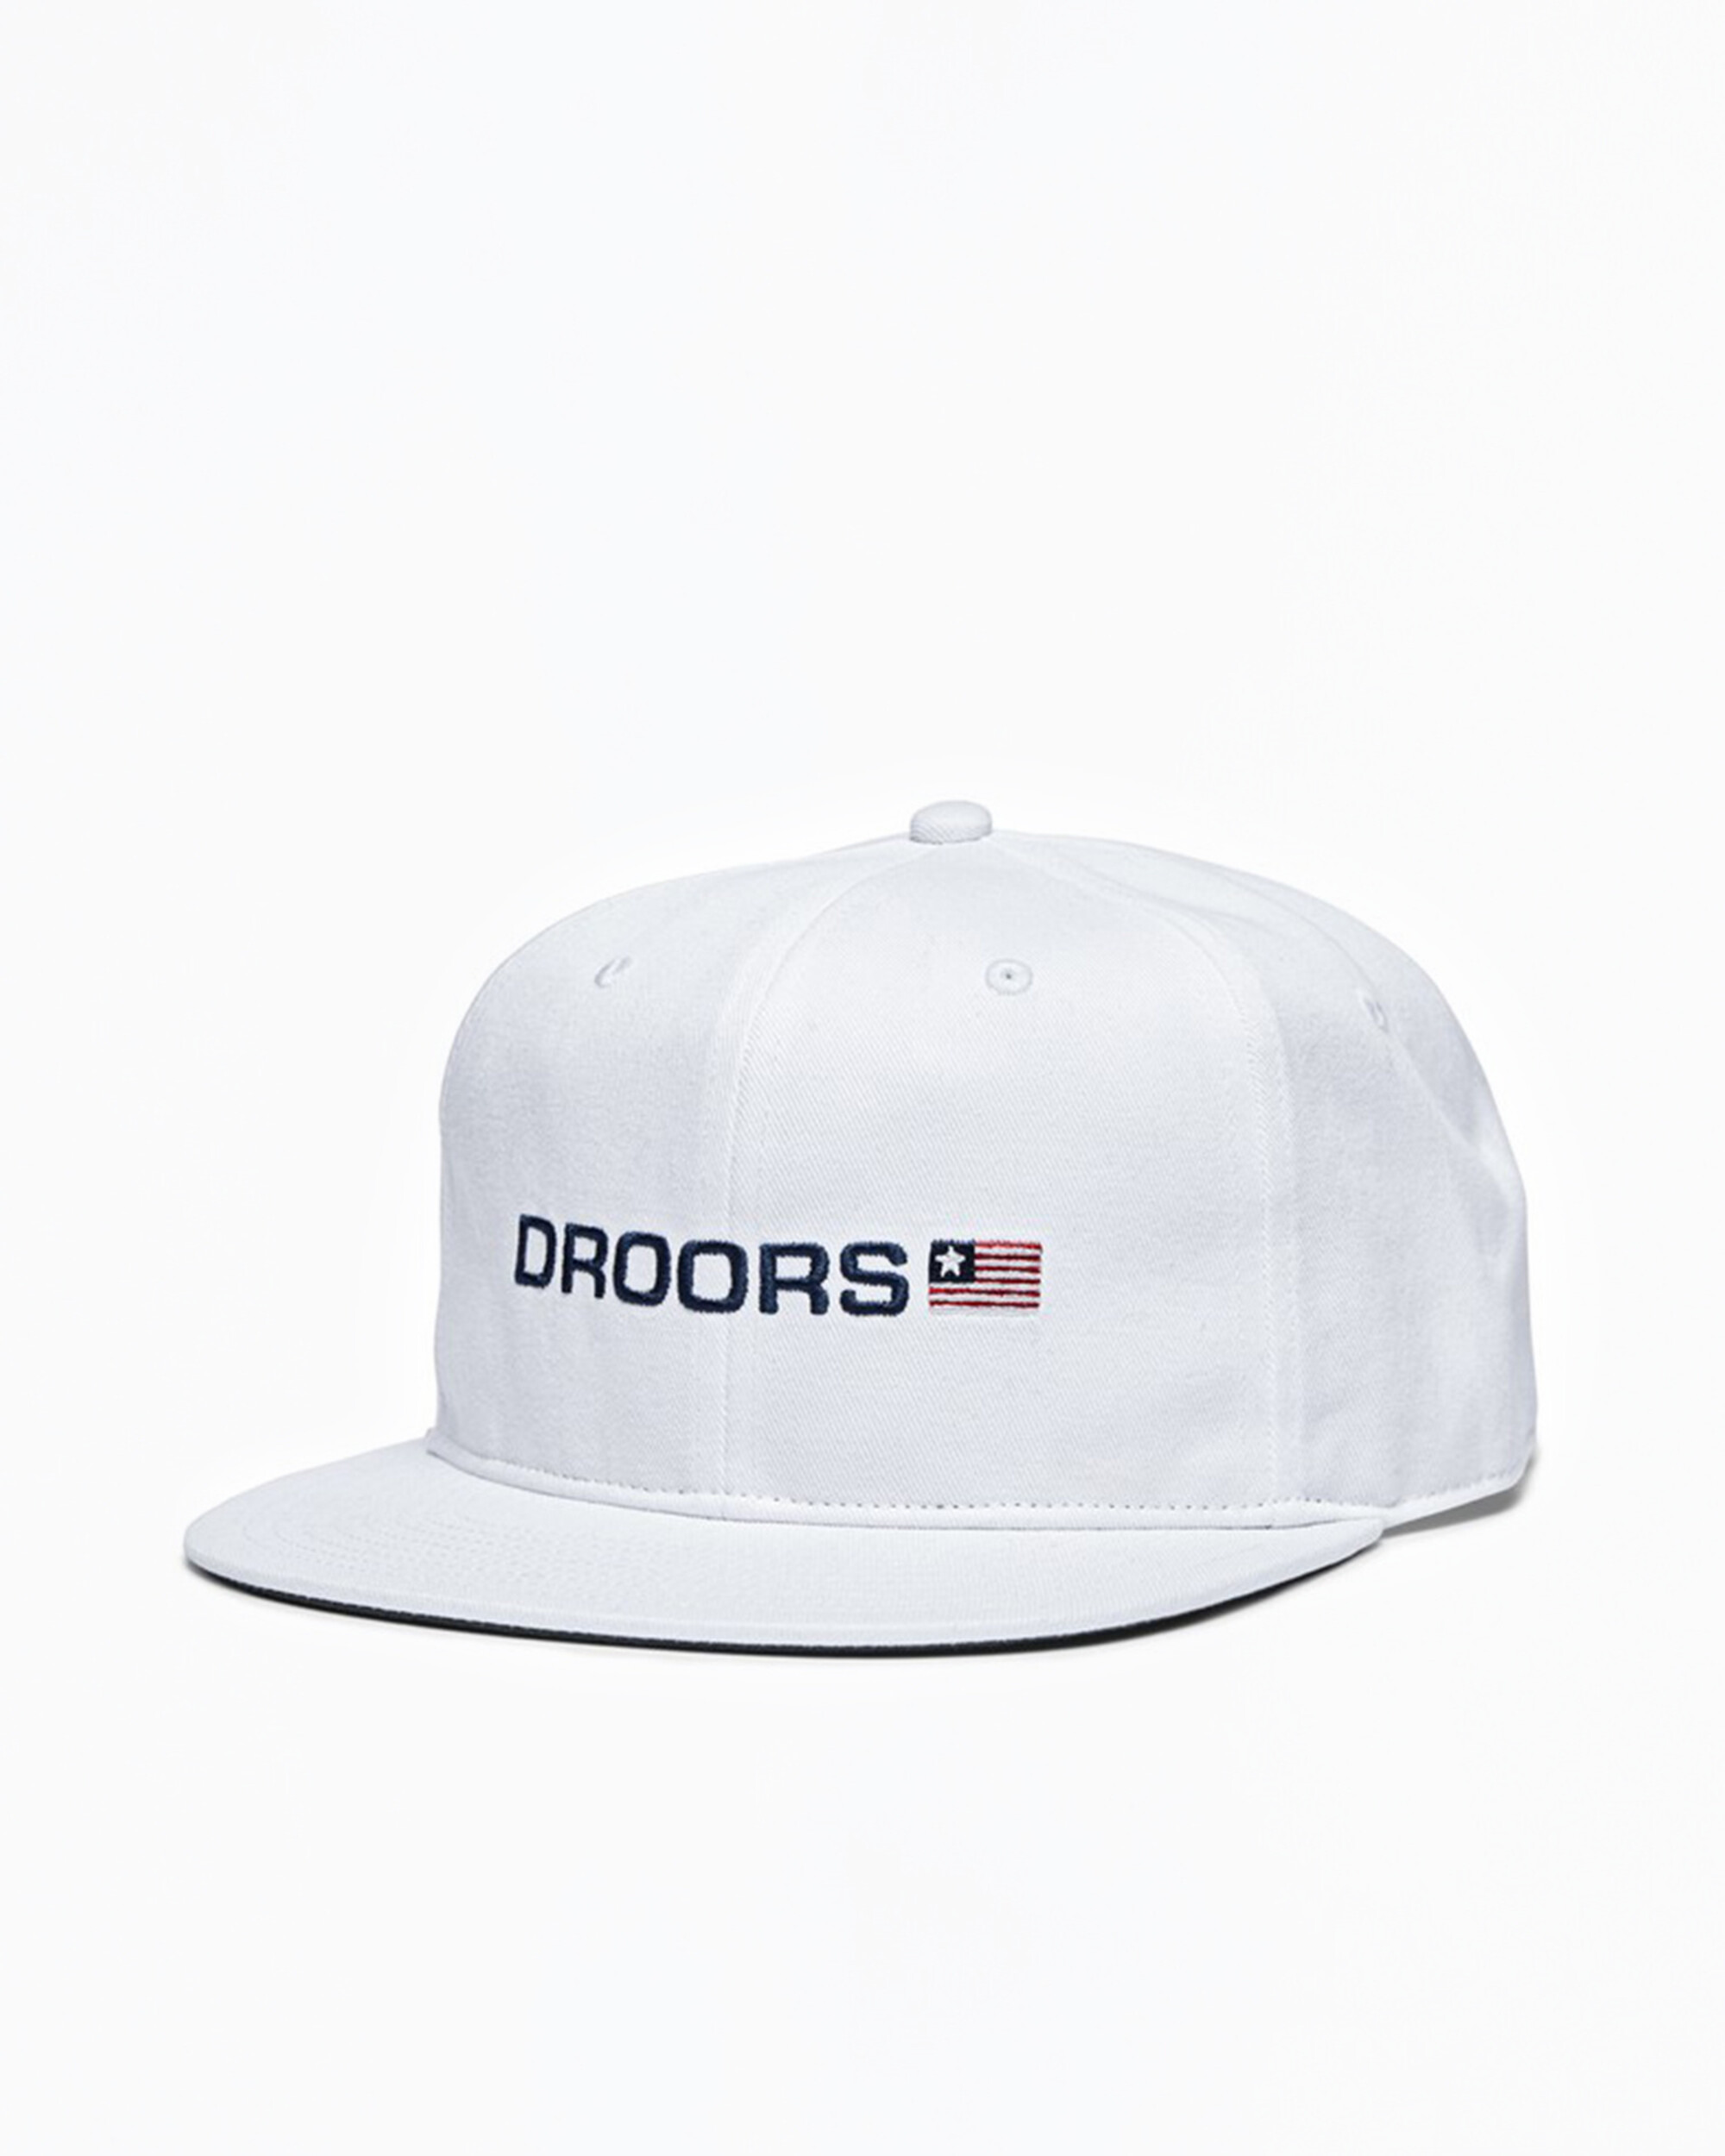 DROORS Flag One Hat White